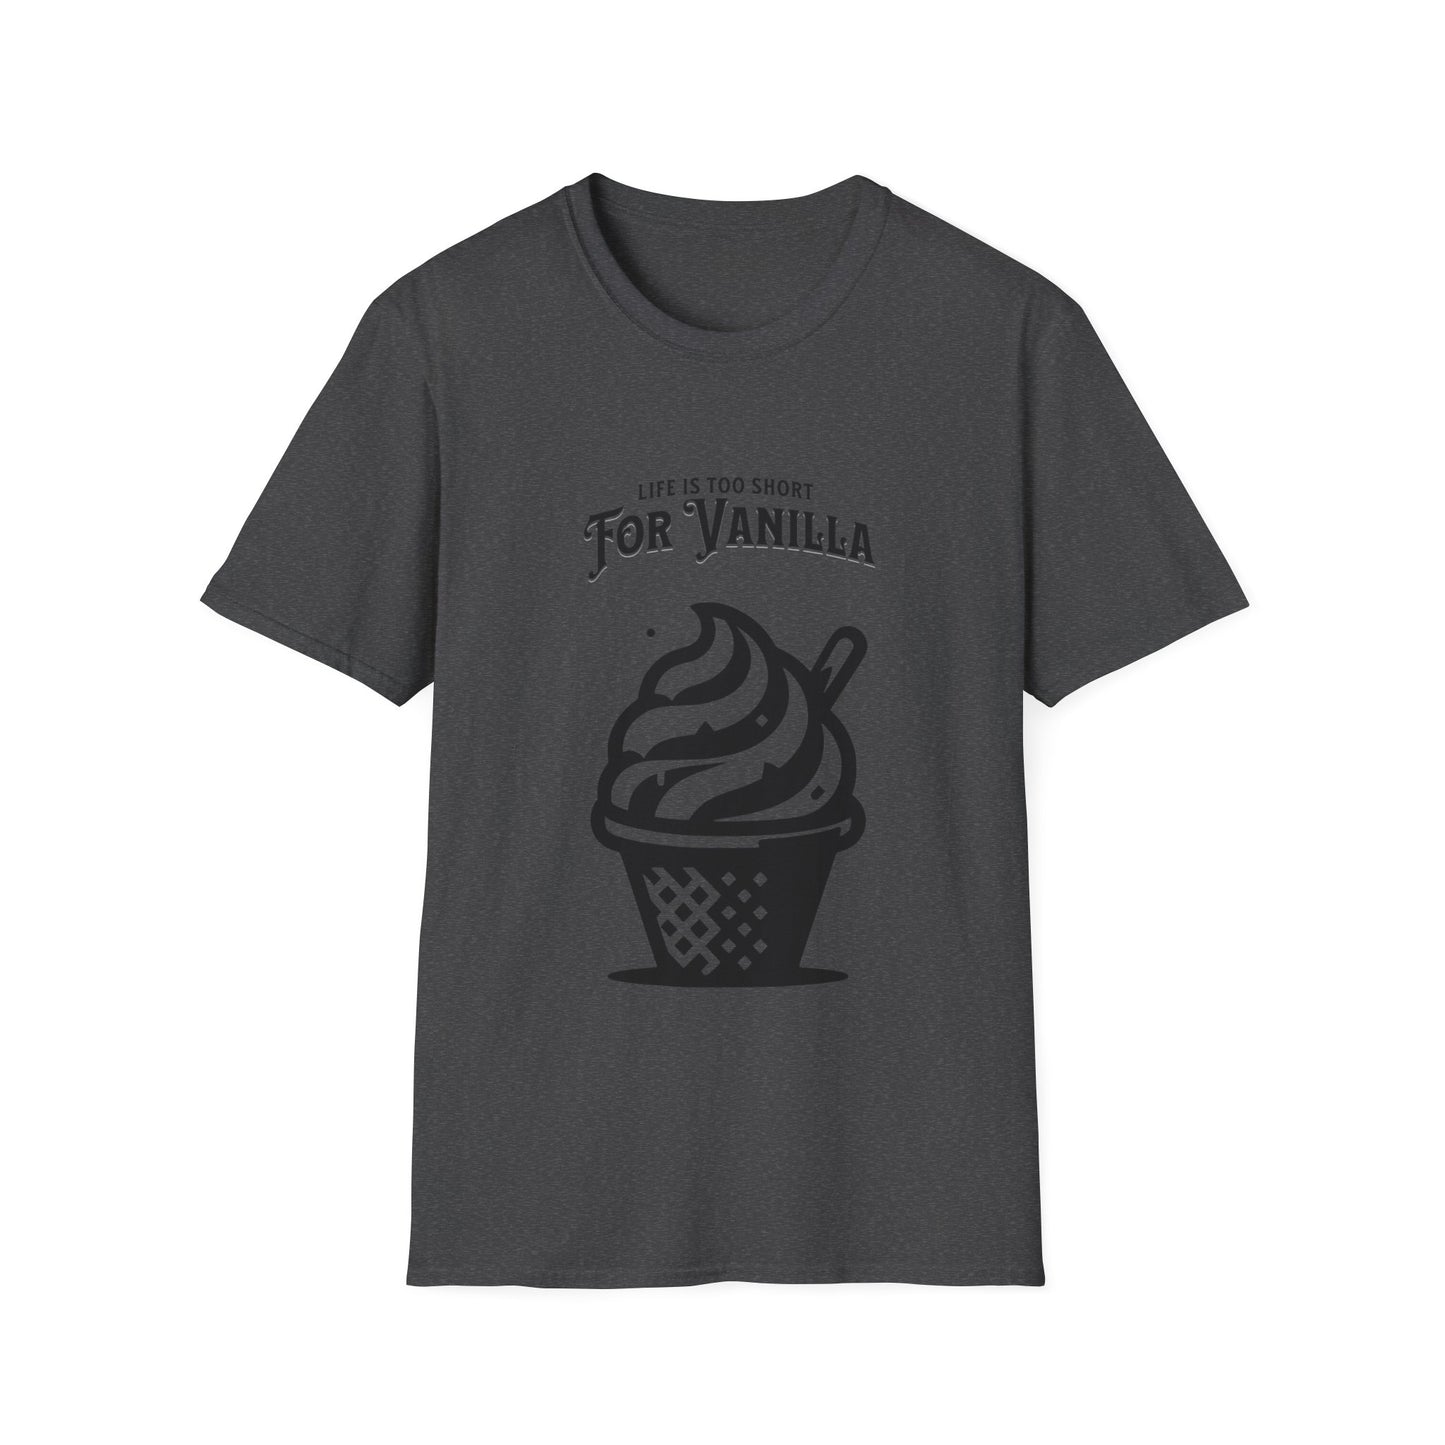 Life is Too Short for Vanilla T-Shirt - Funny Tee - Not Vanilla Kink Unisex Softstyle T-Shirt